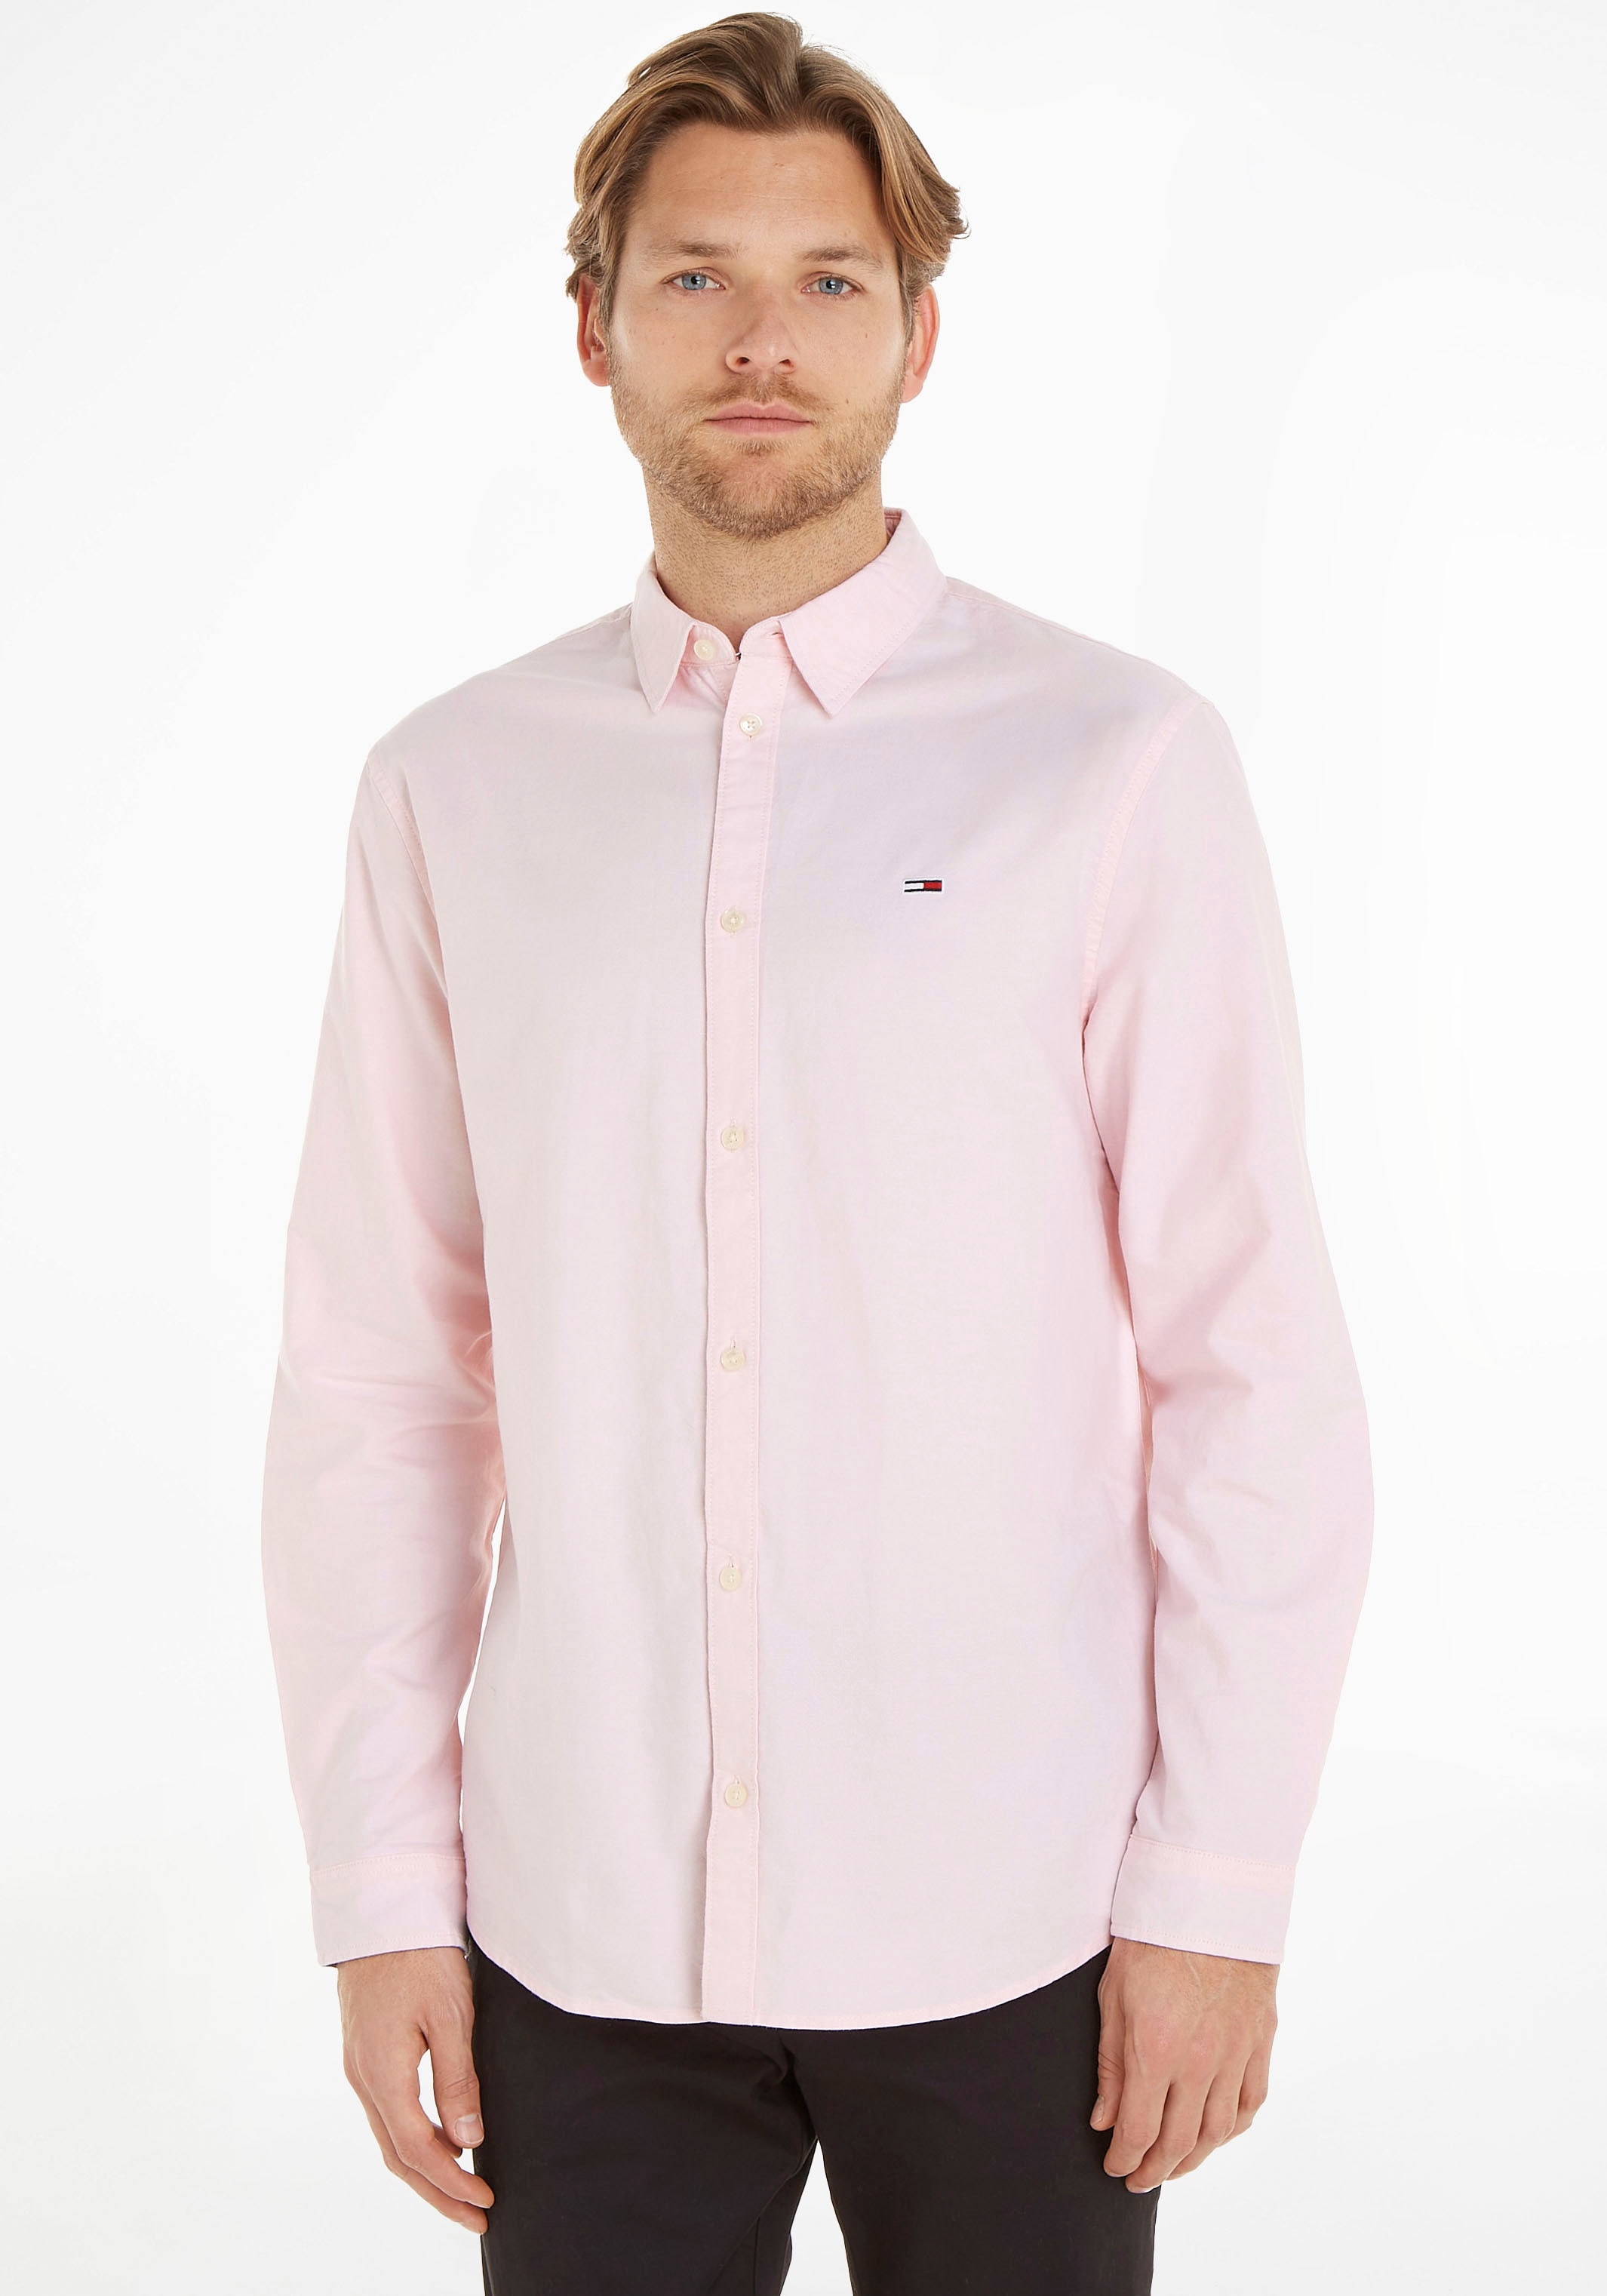 Tommy Jeans CLASSIC Langarmhemd SHIRT«, OXFORD »TJM online mit bei Knopfleiste